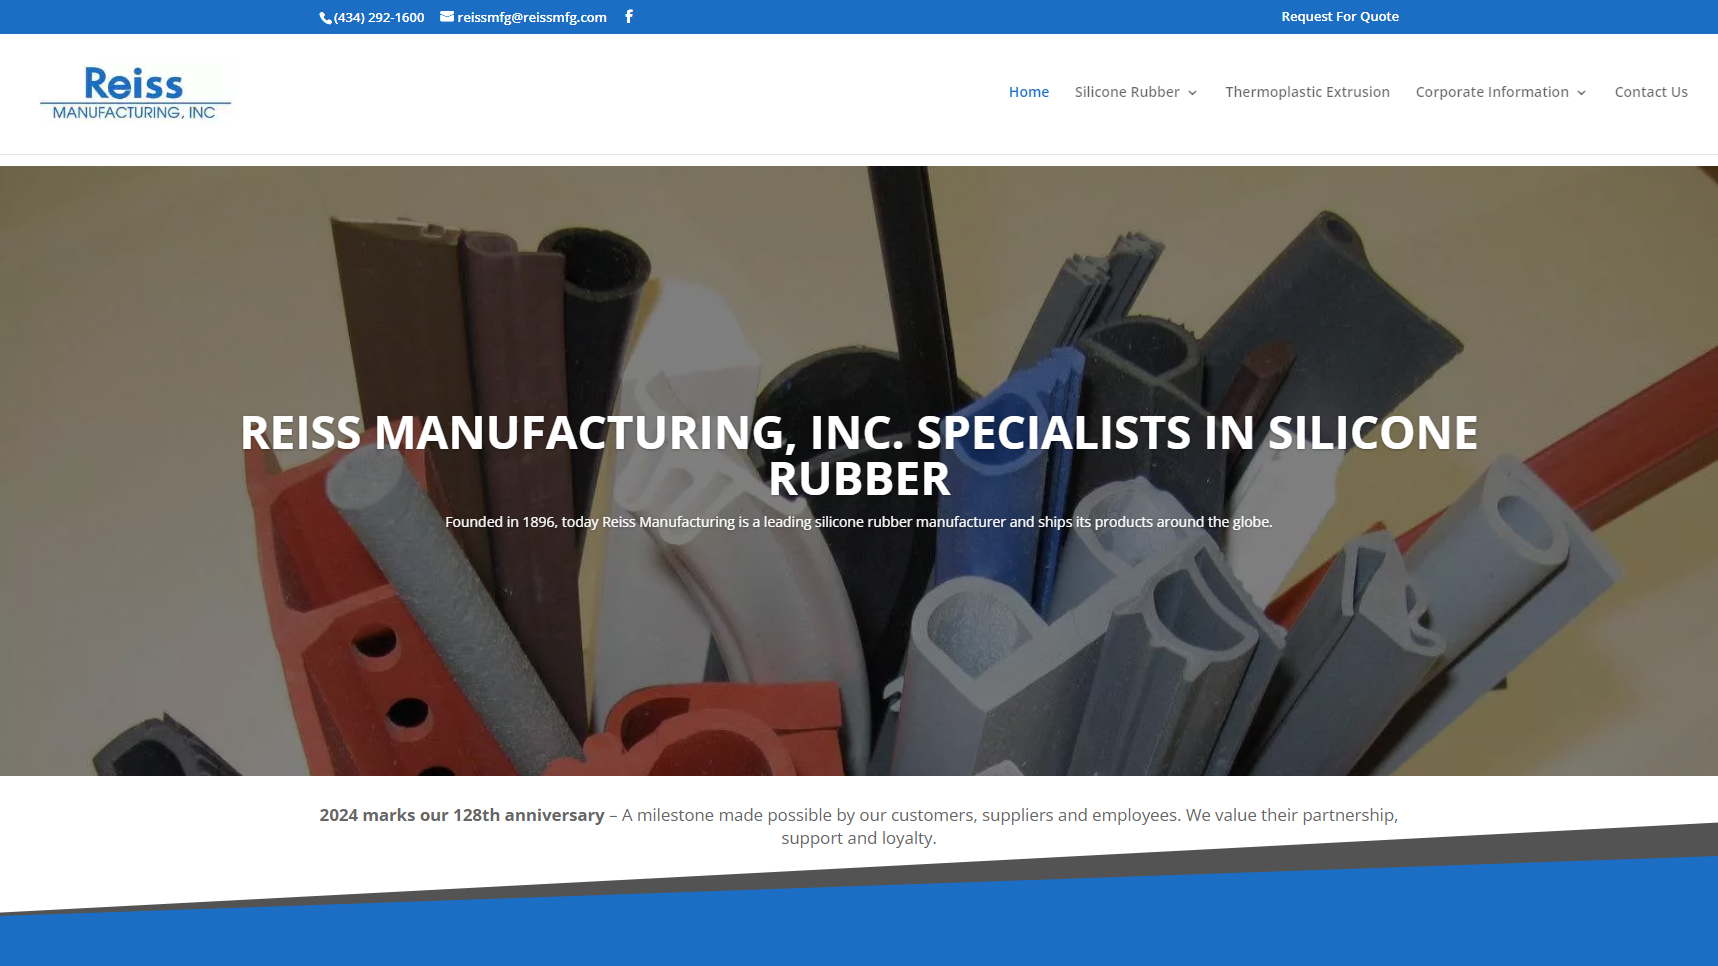 Reiss Manufacturing, Inc. - Silicone Rubber Manufacturer